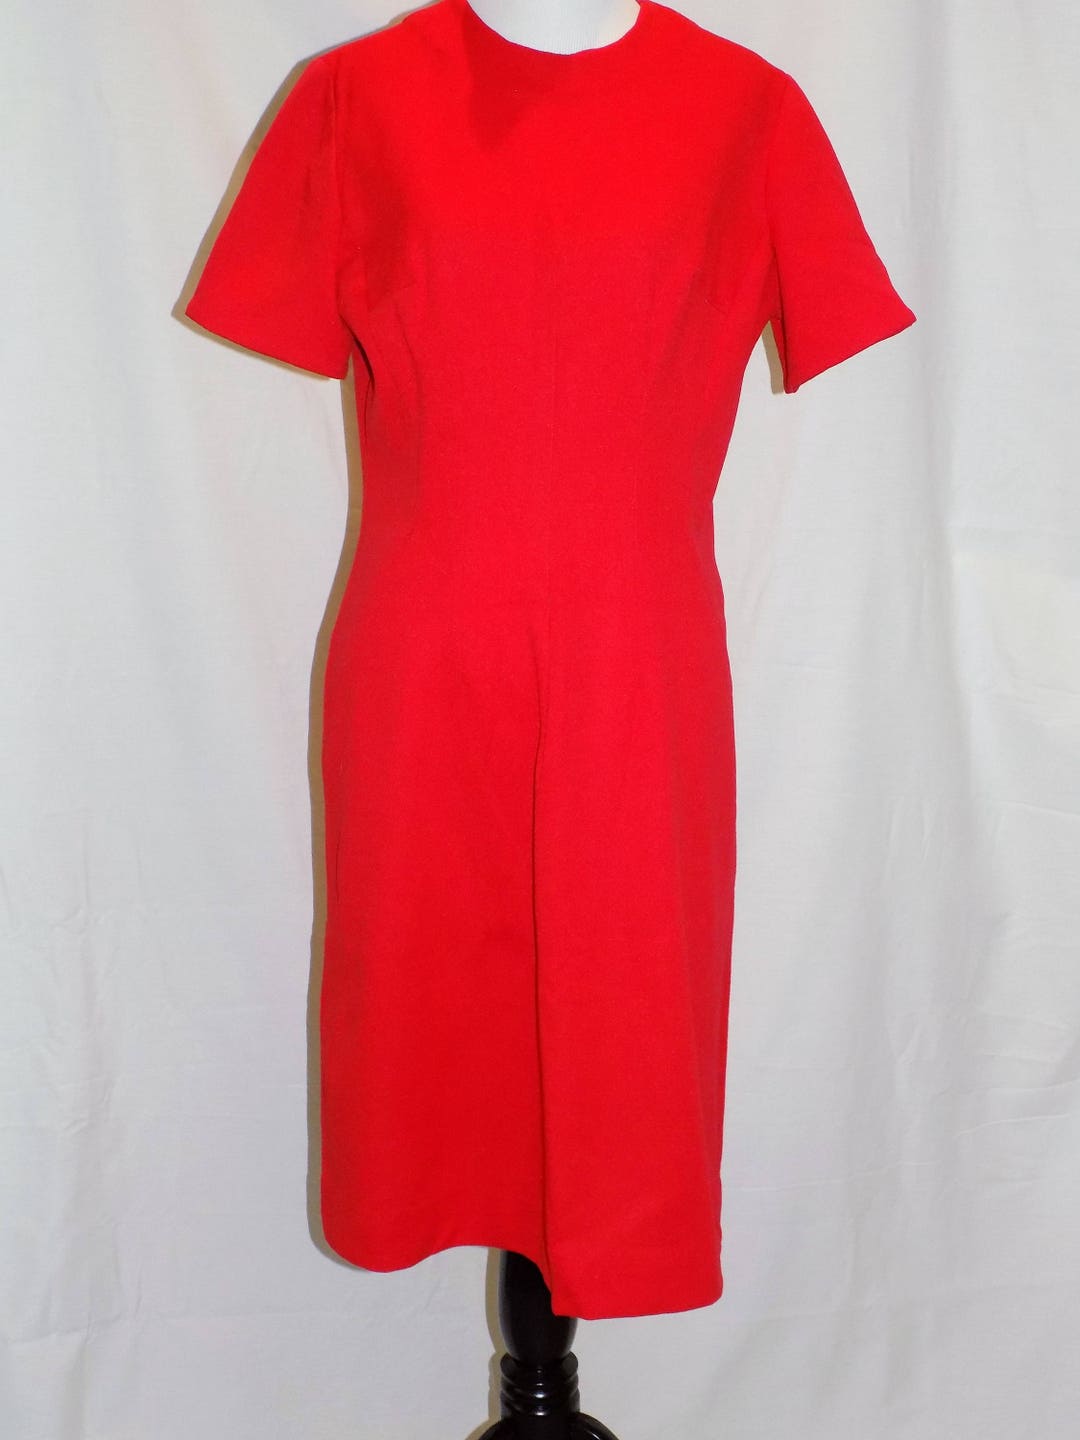 Ruby Red Vintage 1960s Red Shift Dress// Mod S M - Etsy